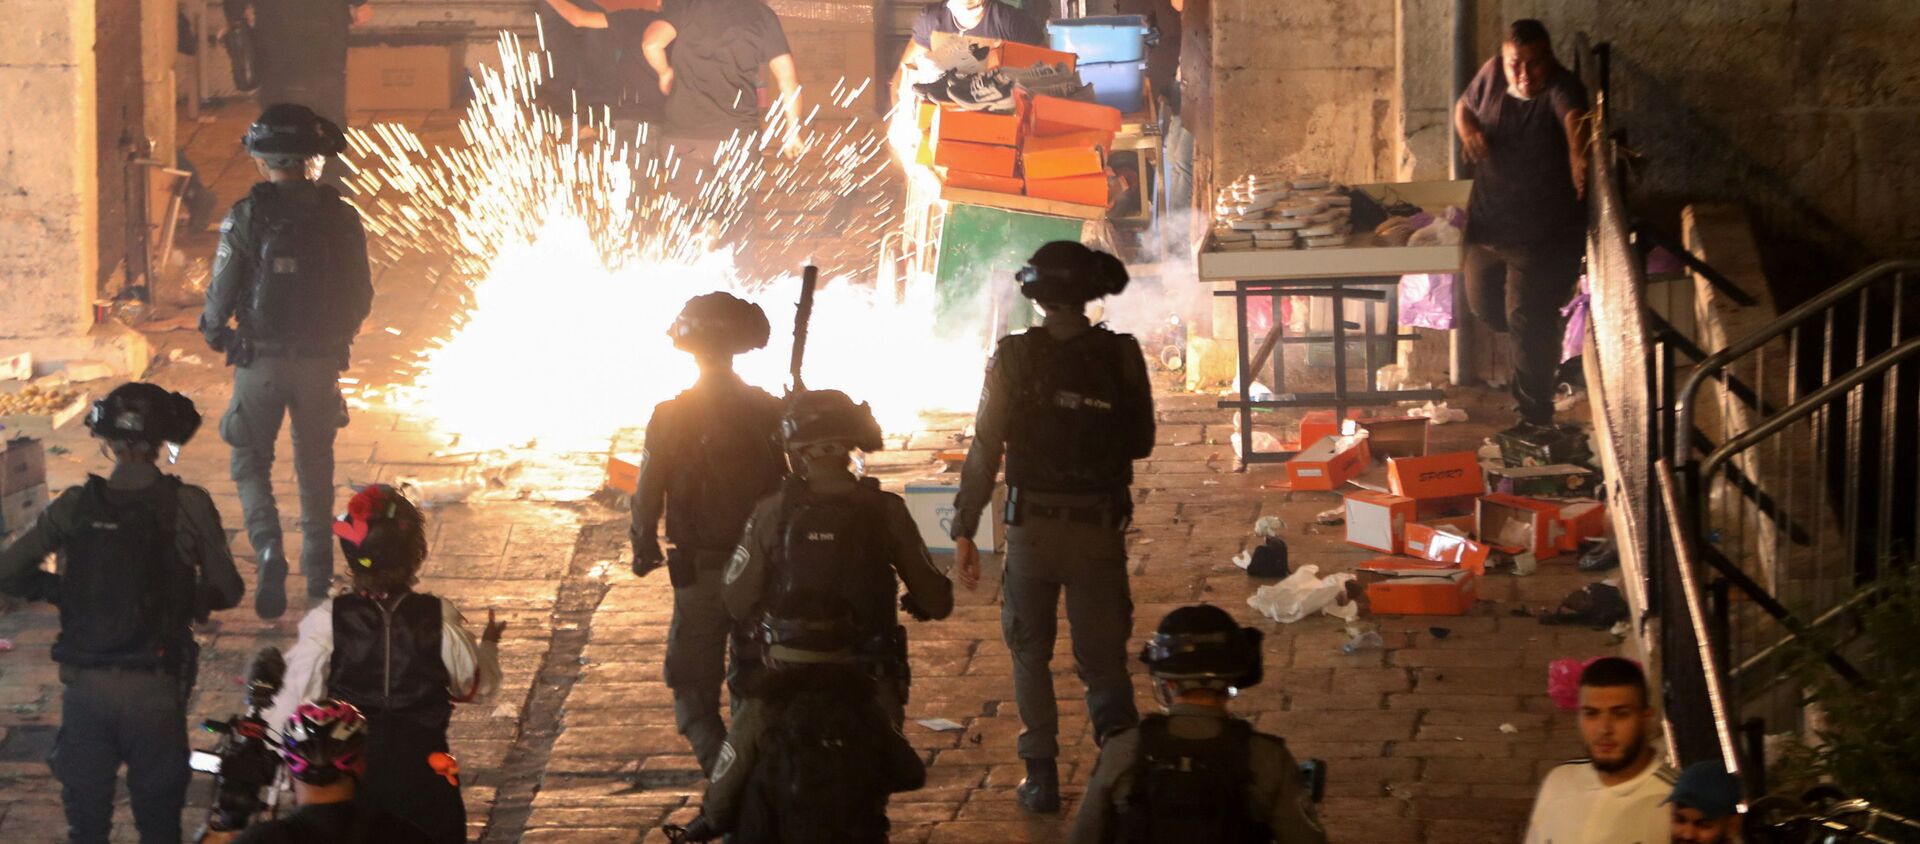 Palestinians react as Israeli police fire a stun grenade during clashes at Damascus Gate on Laylat al-Qadr during the holy month of Ramadan, in Jerusalem's Old City, May 9, 2021 - Sputnik International, 1920, 08.05.2021